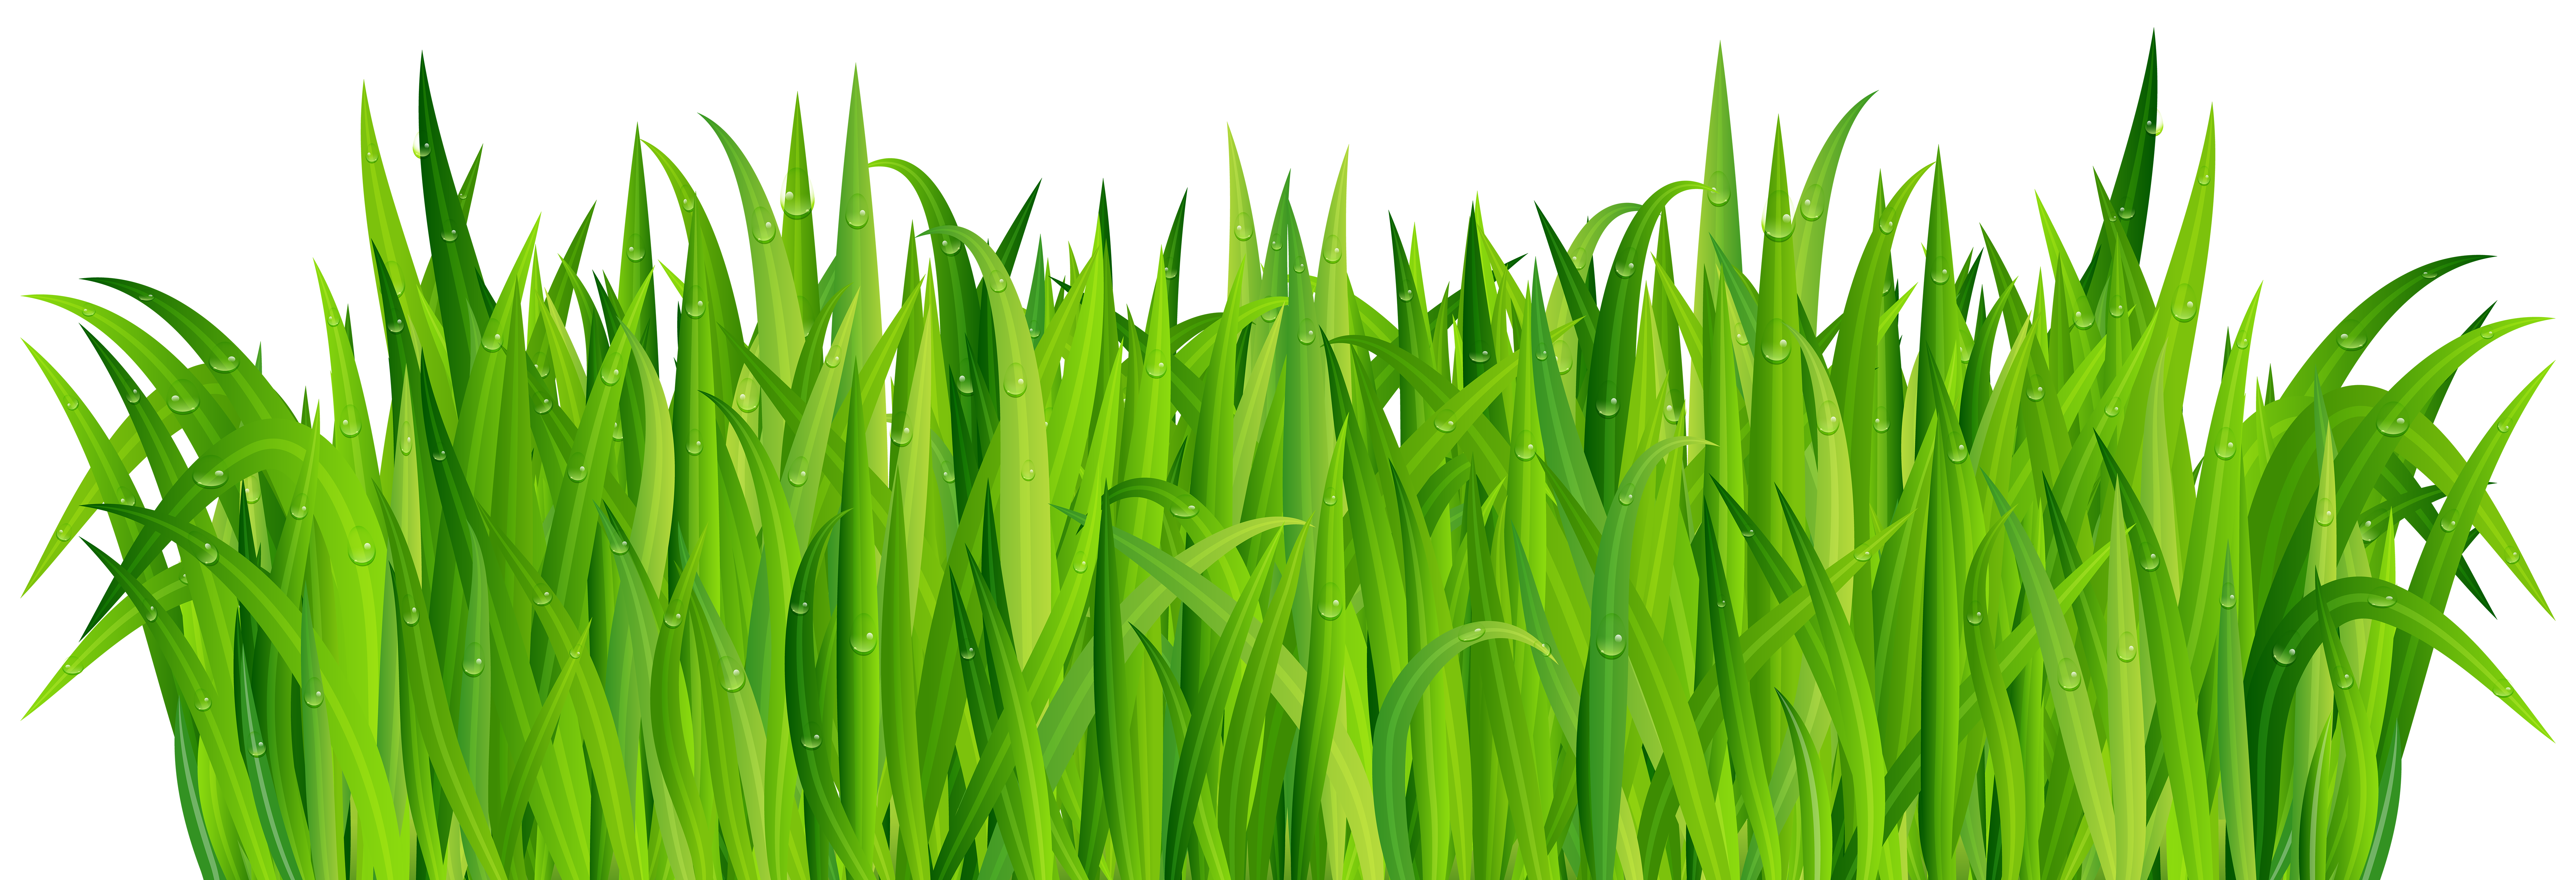 Fresh Green Grass PNG Clip Art Image | Gallery Yopriceville - High